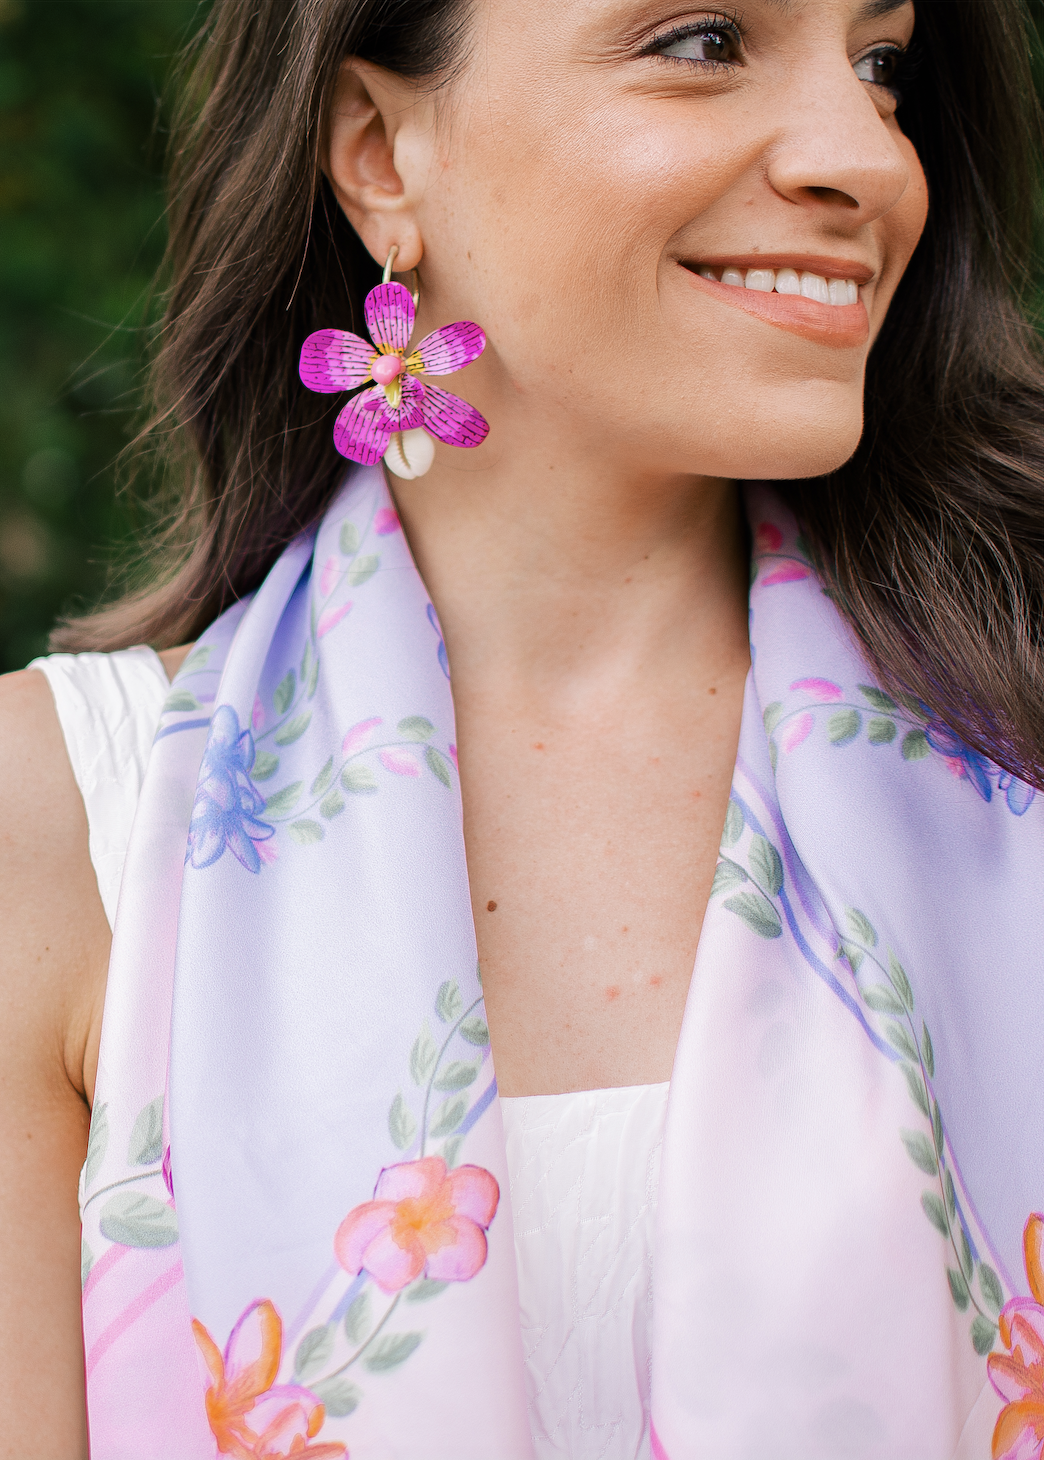 Silk Scarves Are The Perfect Summer Accessory